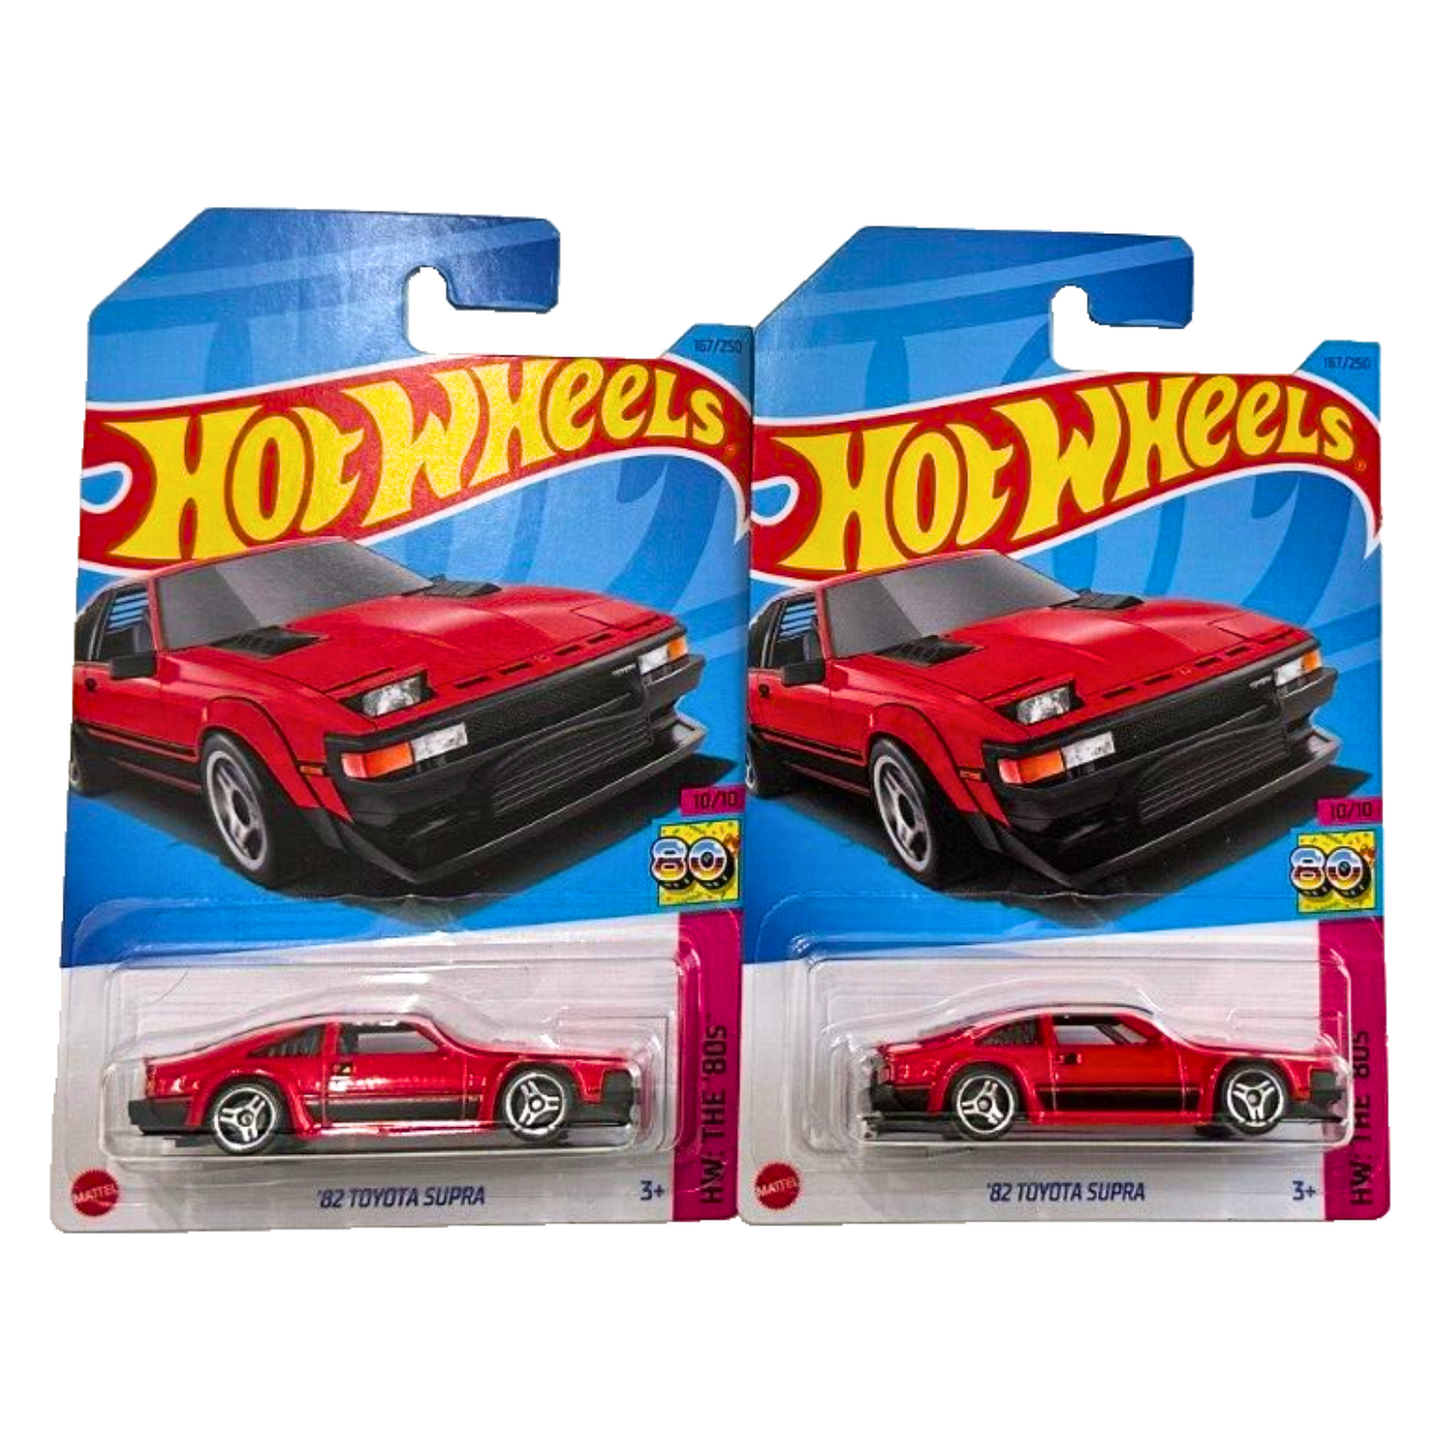 Lot of 2 Hot Wheels The 80s '82 Toyota Supra 1:64 Diecast